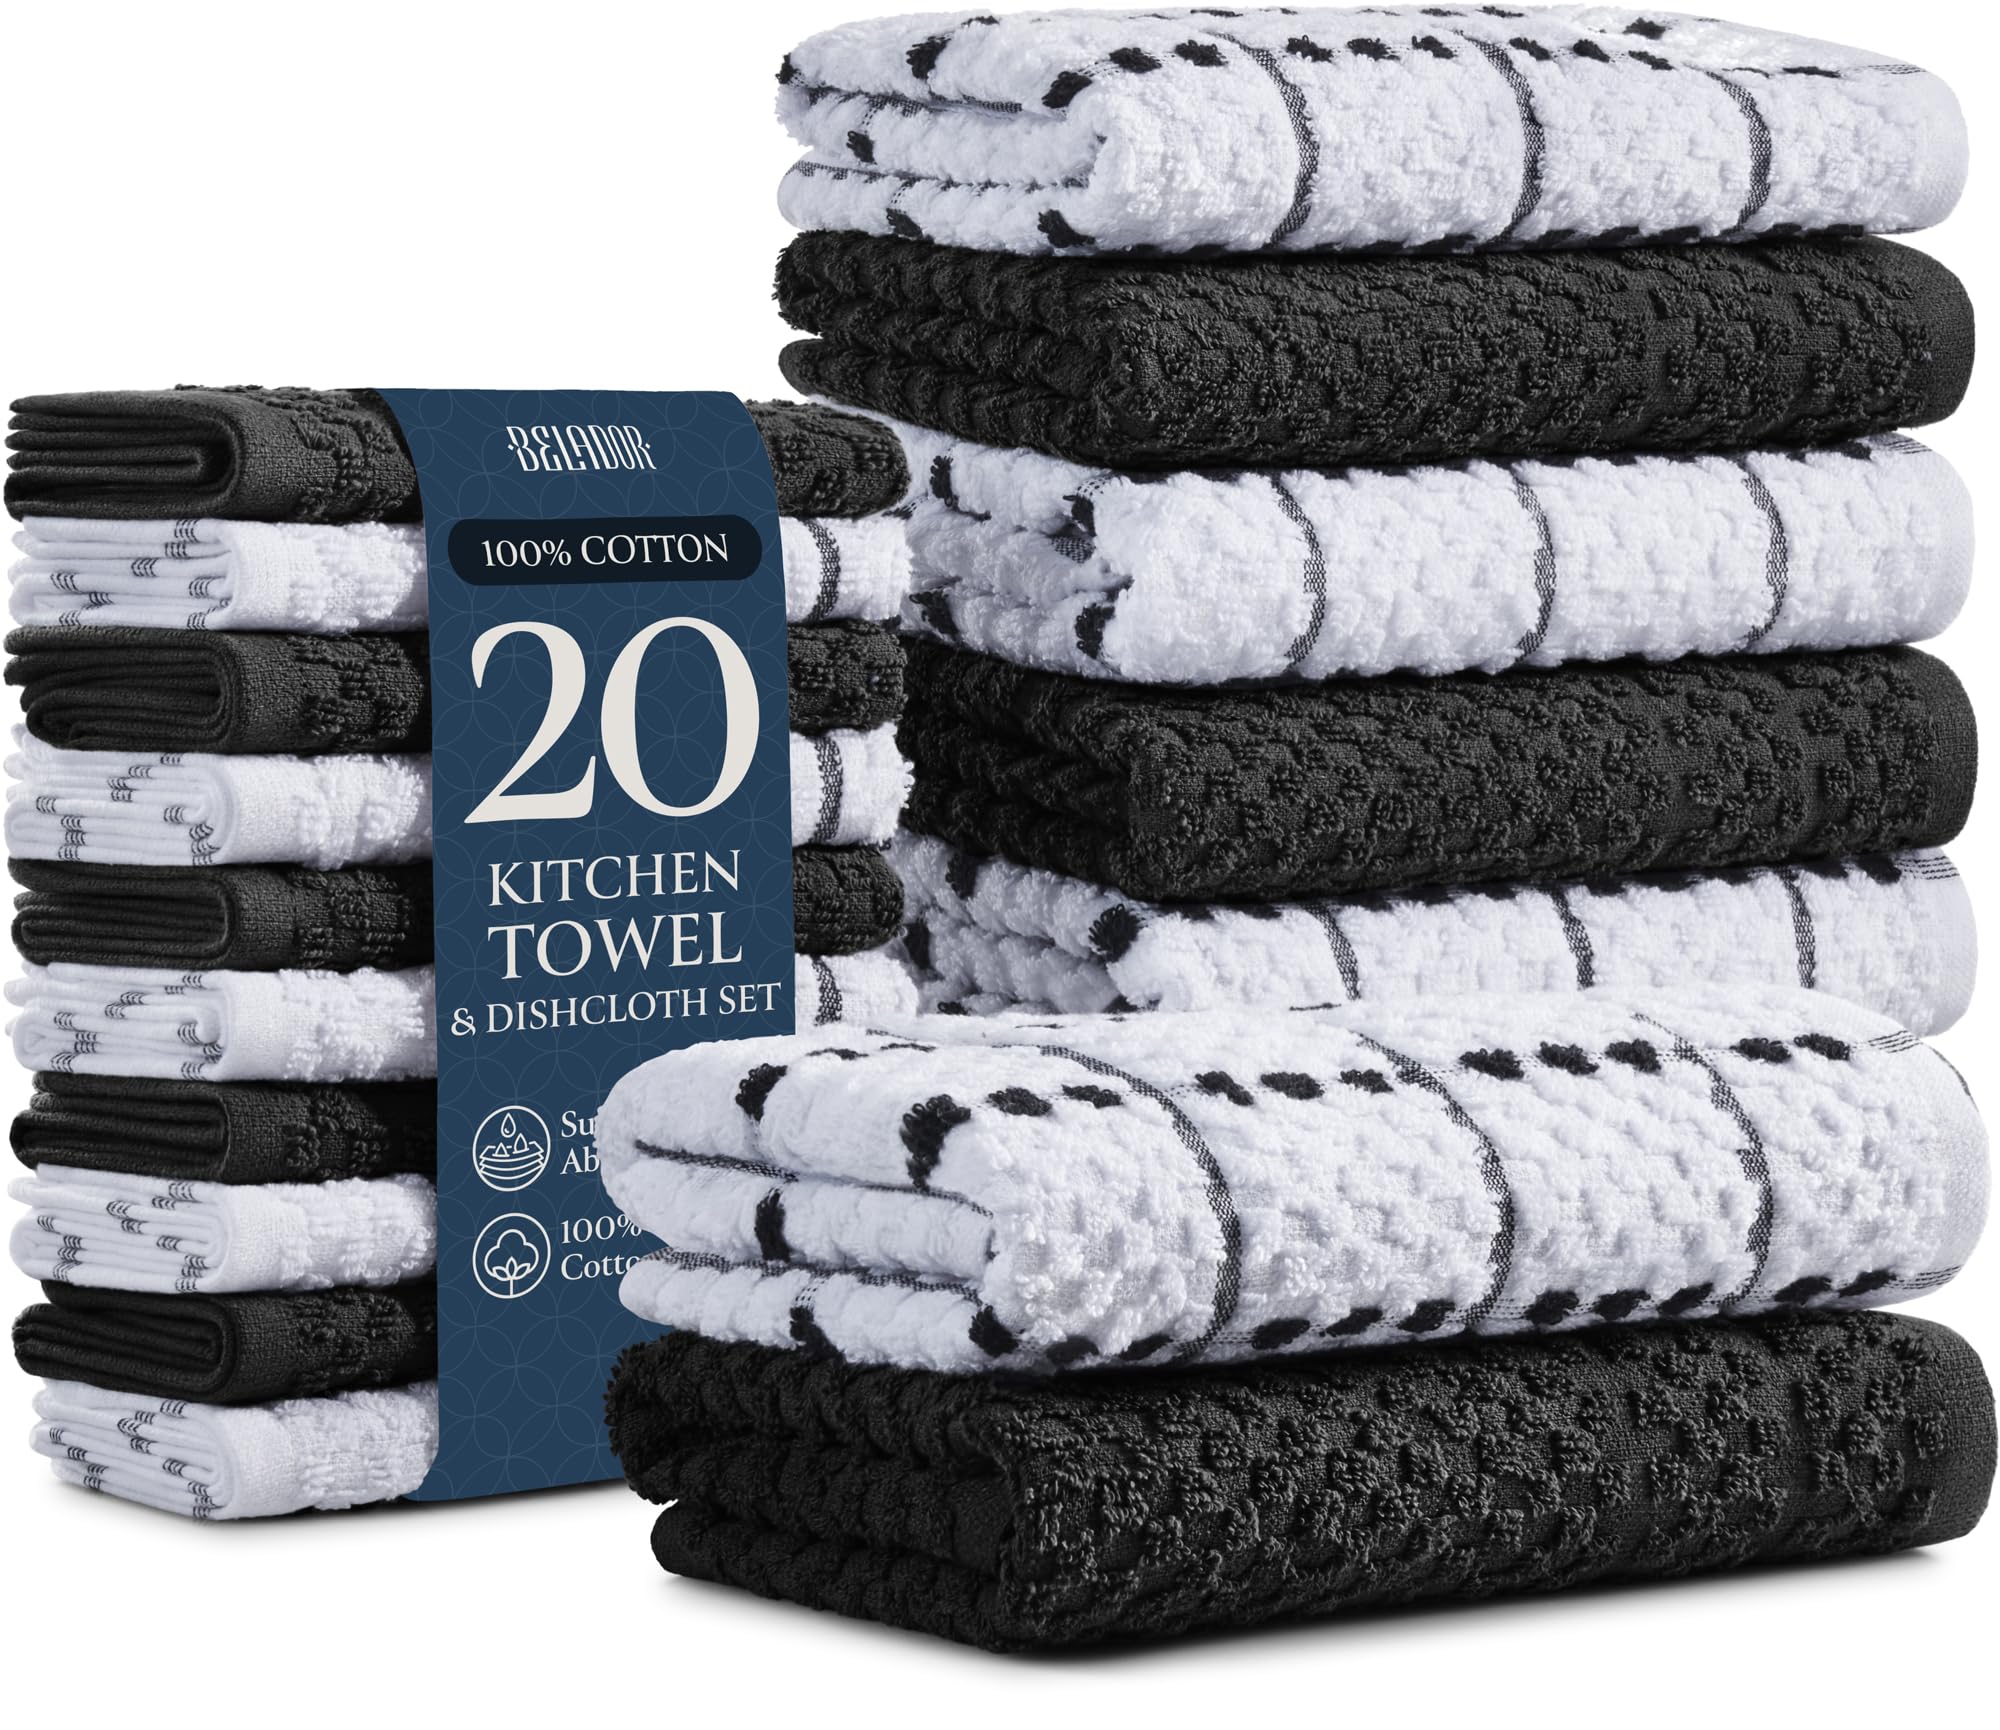 20-Piece Kitchen Towels And Dishcloths Sets - 100% Cotton Terry Dish Towels For Kitchen - Absorbent & Quick Drying Hand Towels- Super Soft & Scretch Free - 10 Towels 15"x25" + 10 Dish Cloths 12"x12"  - Like New